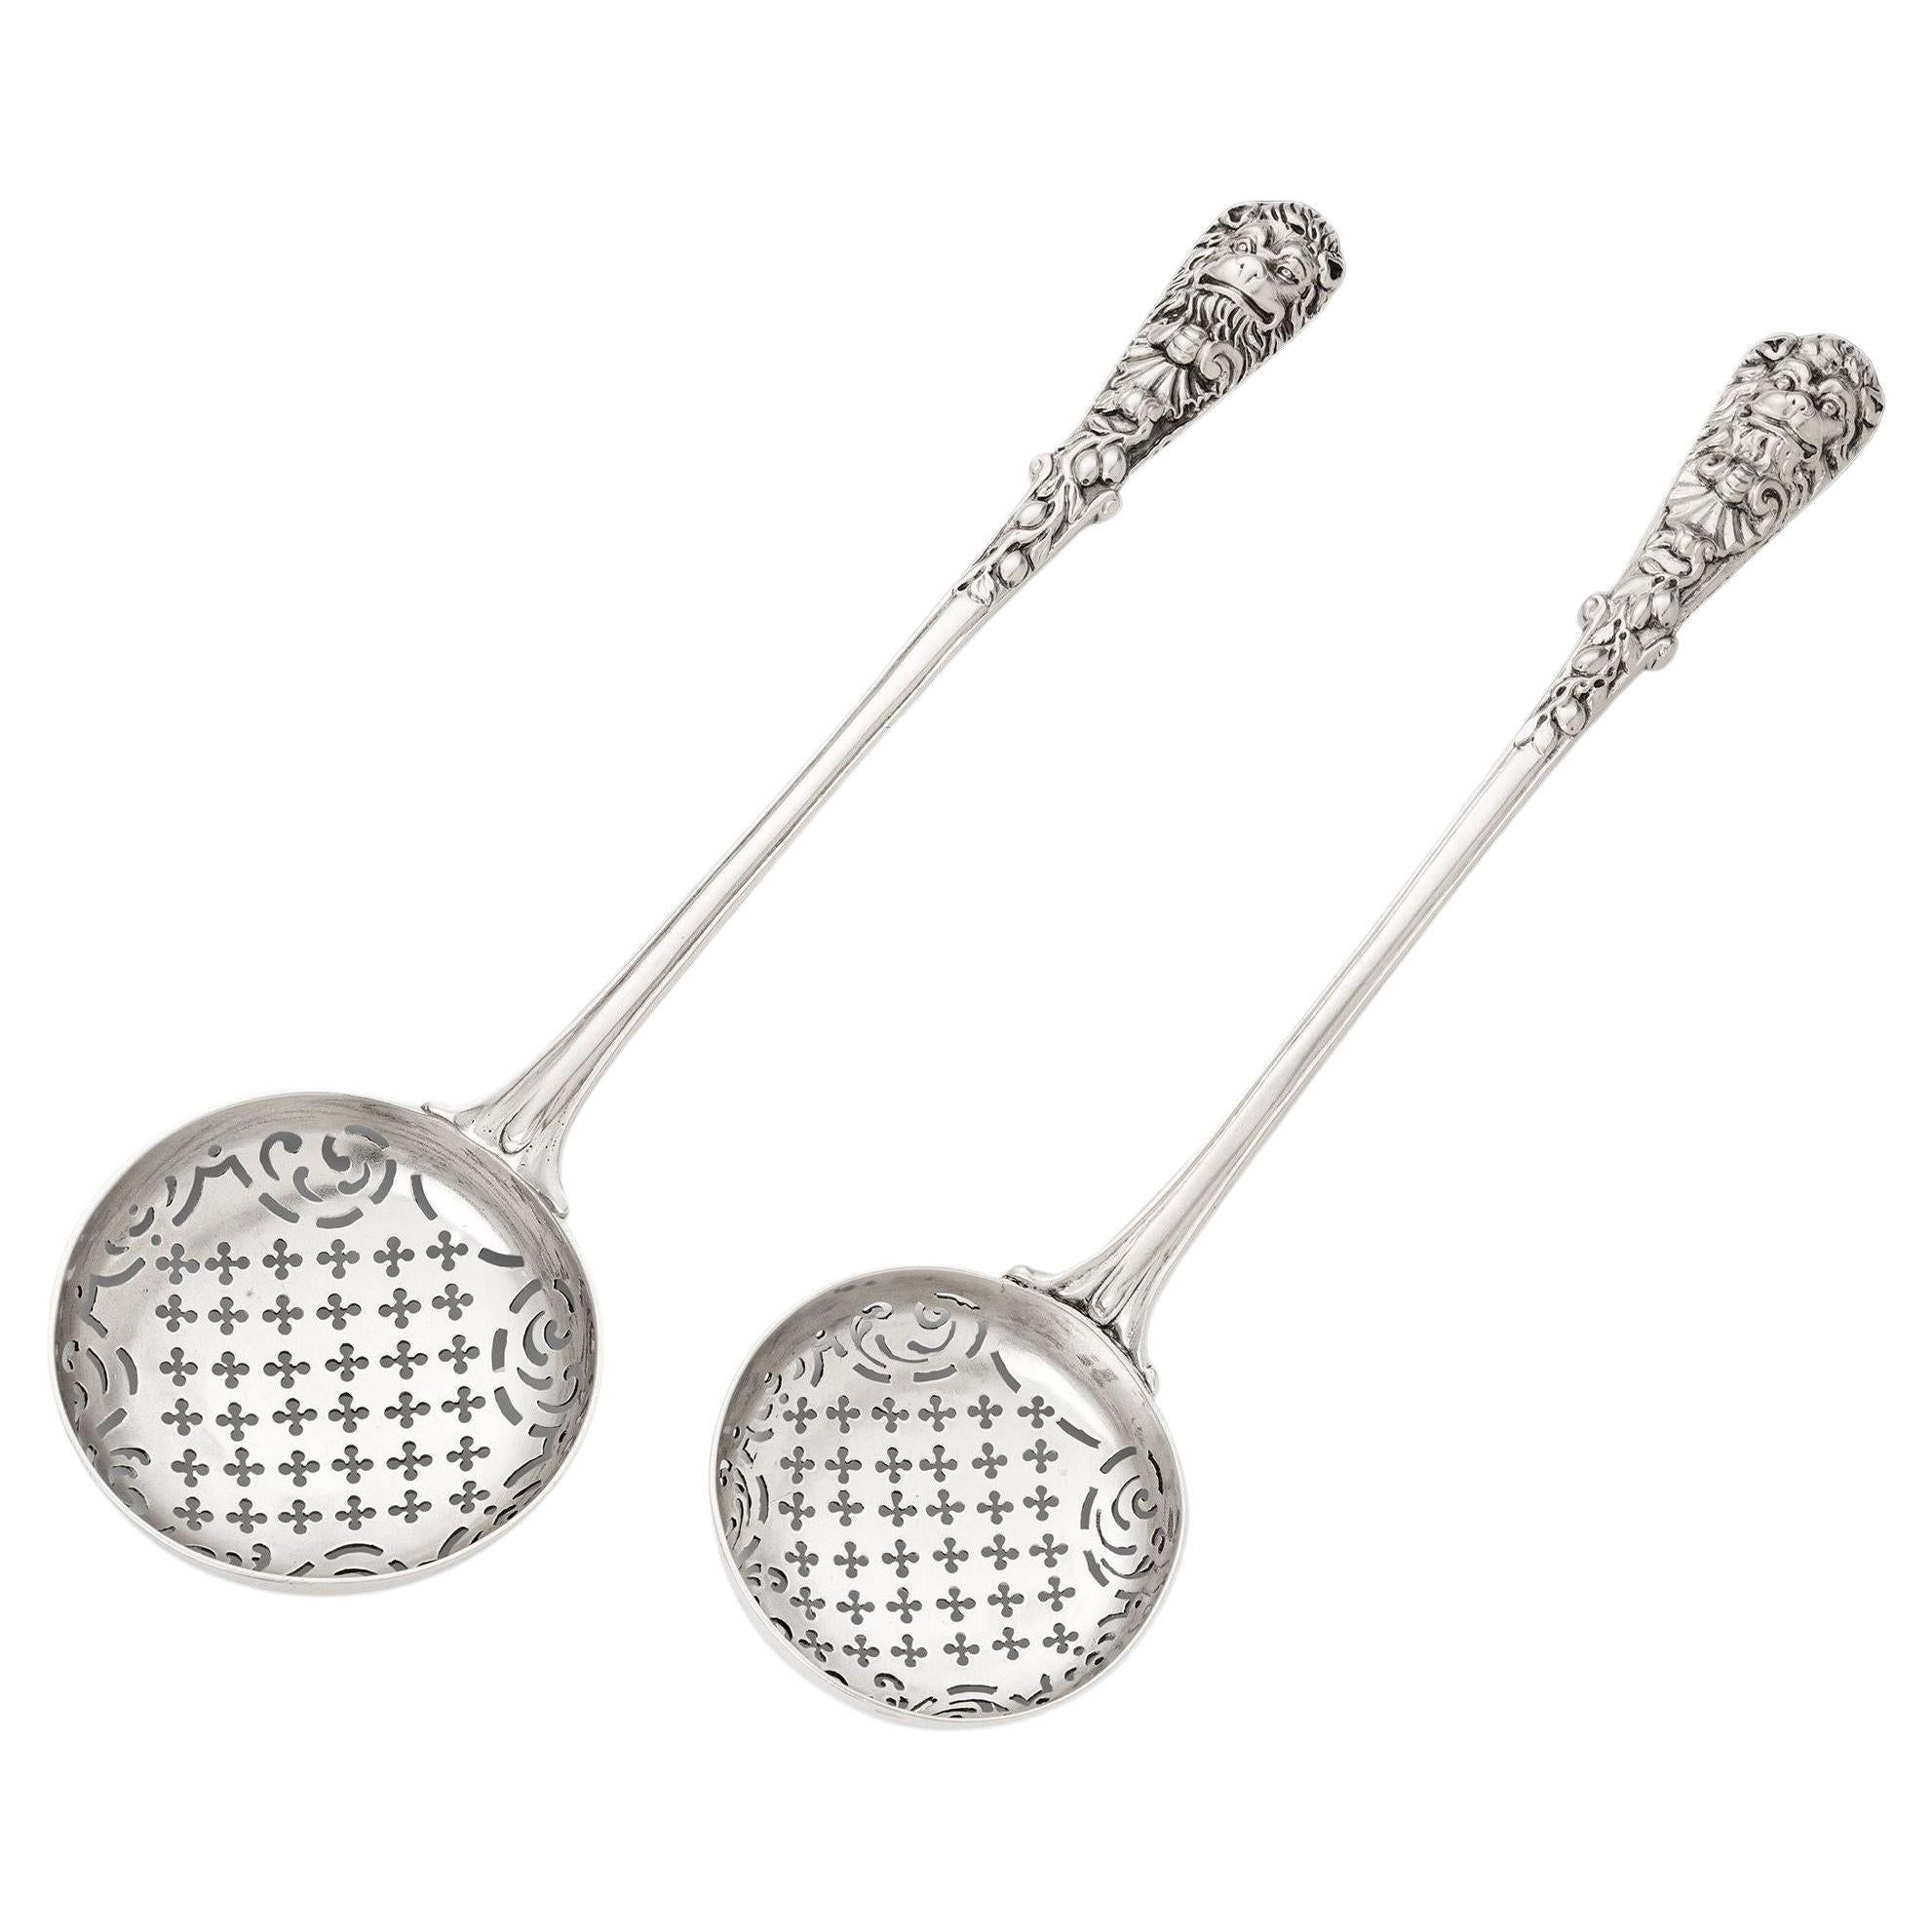 A pair of George II Cast Sifter Spoons, London, 1754/55 by William Cripps. For Sale